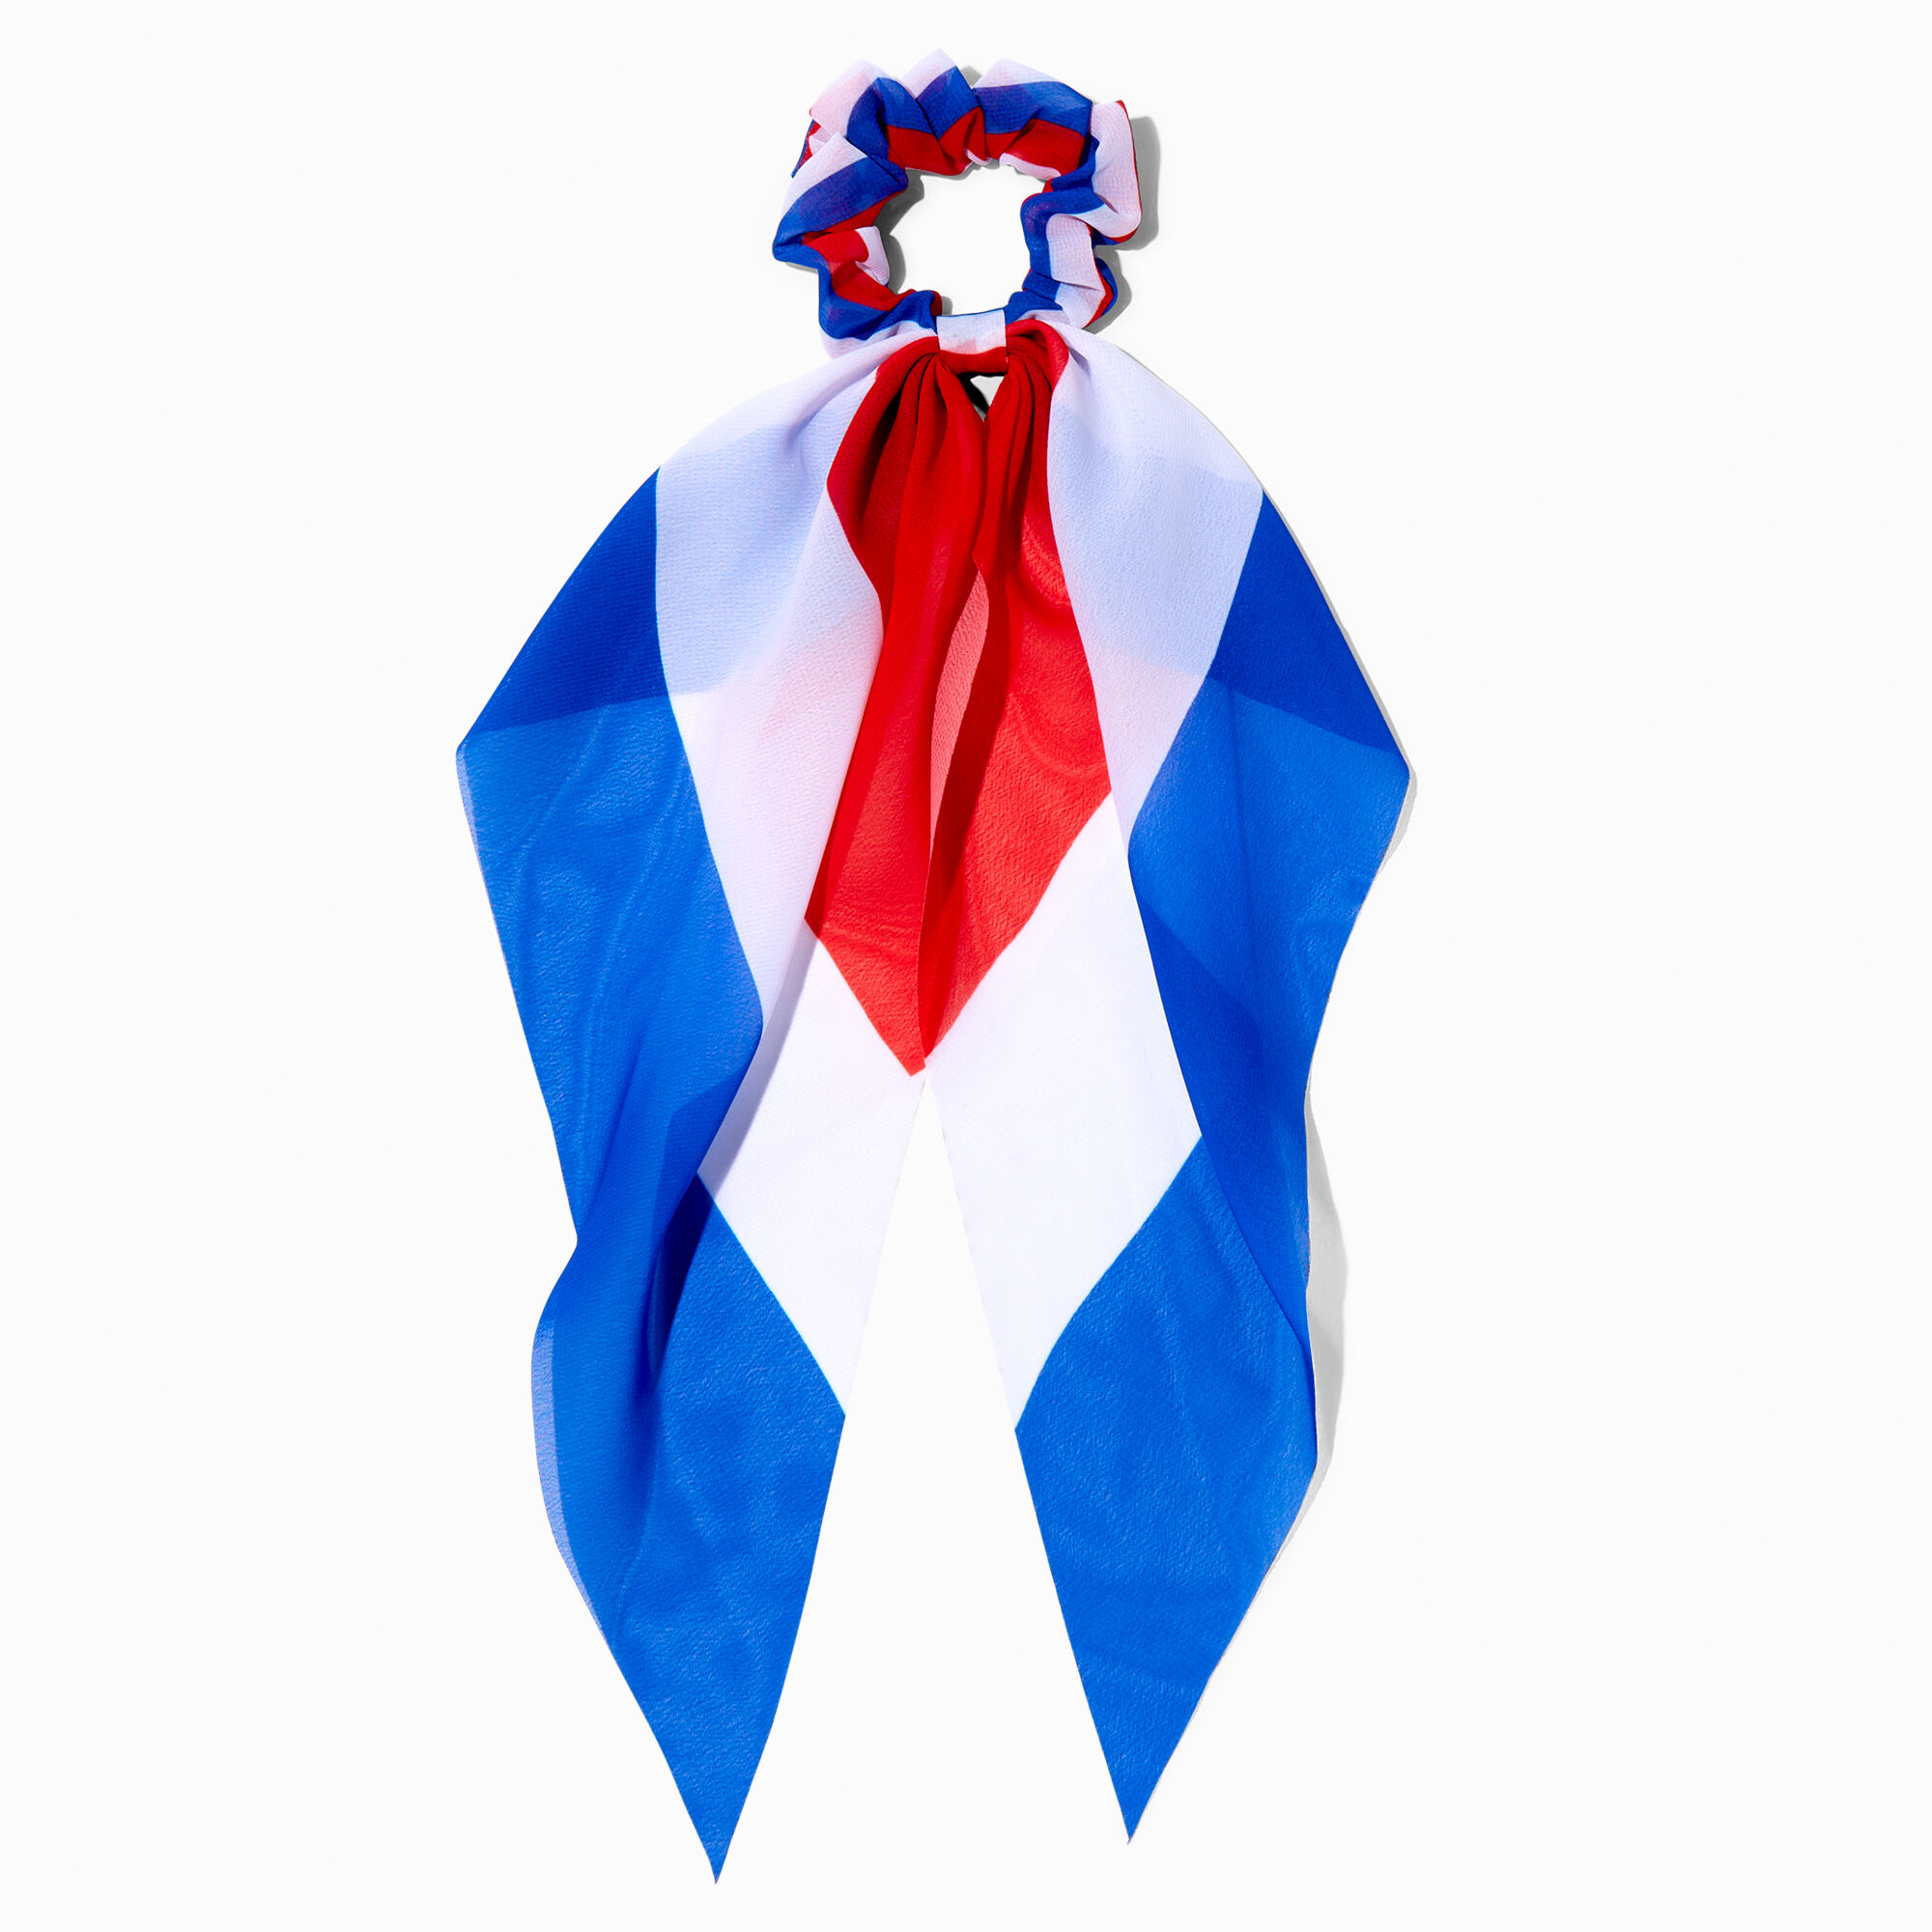 View Claires Red White Scrunchie Scarf Blue information